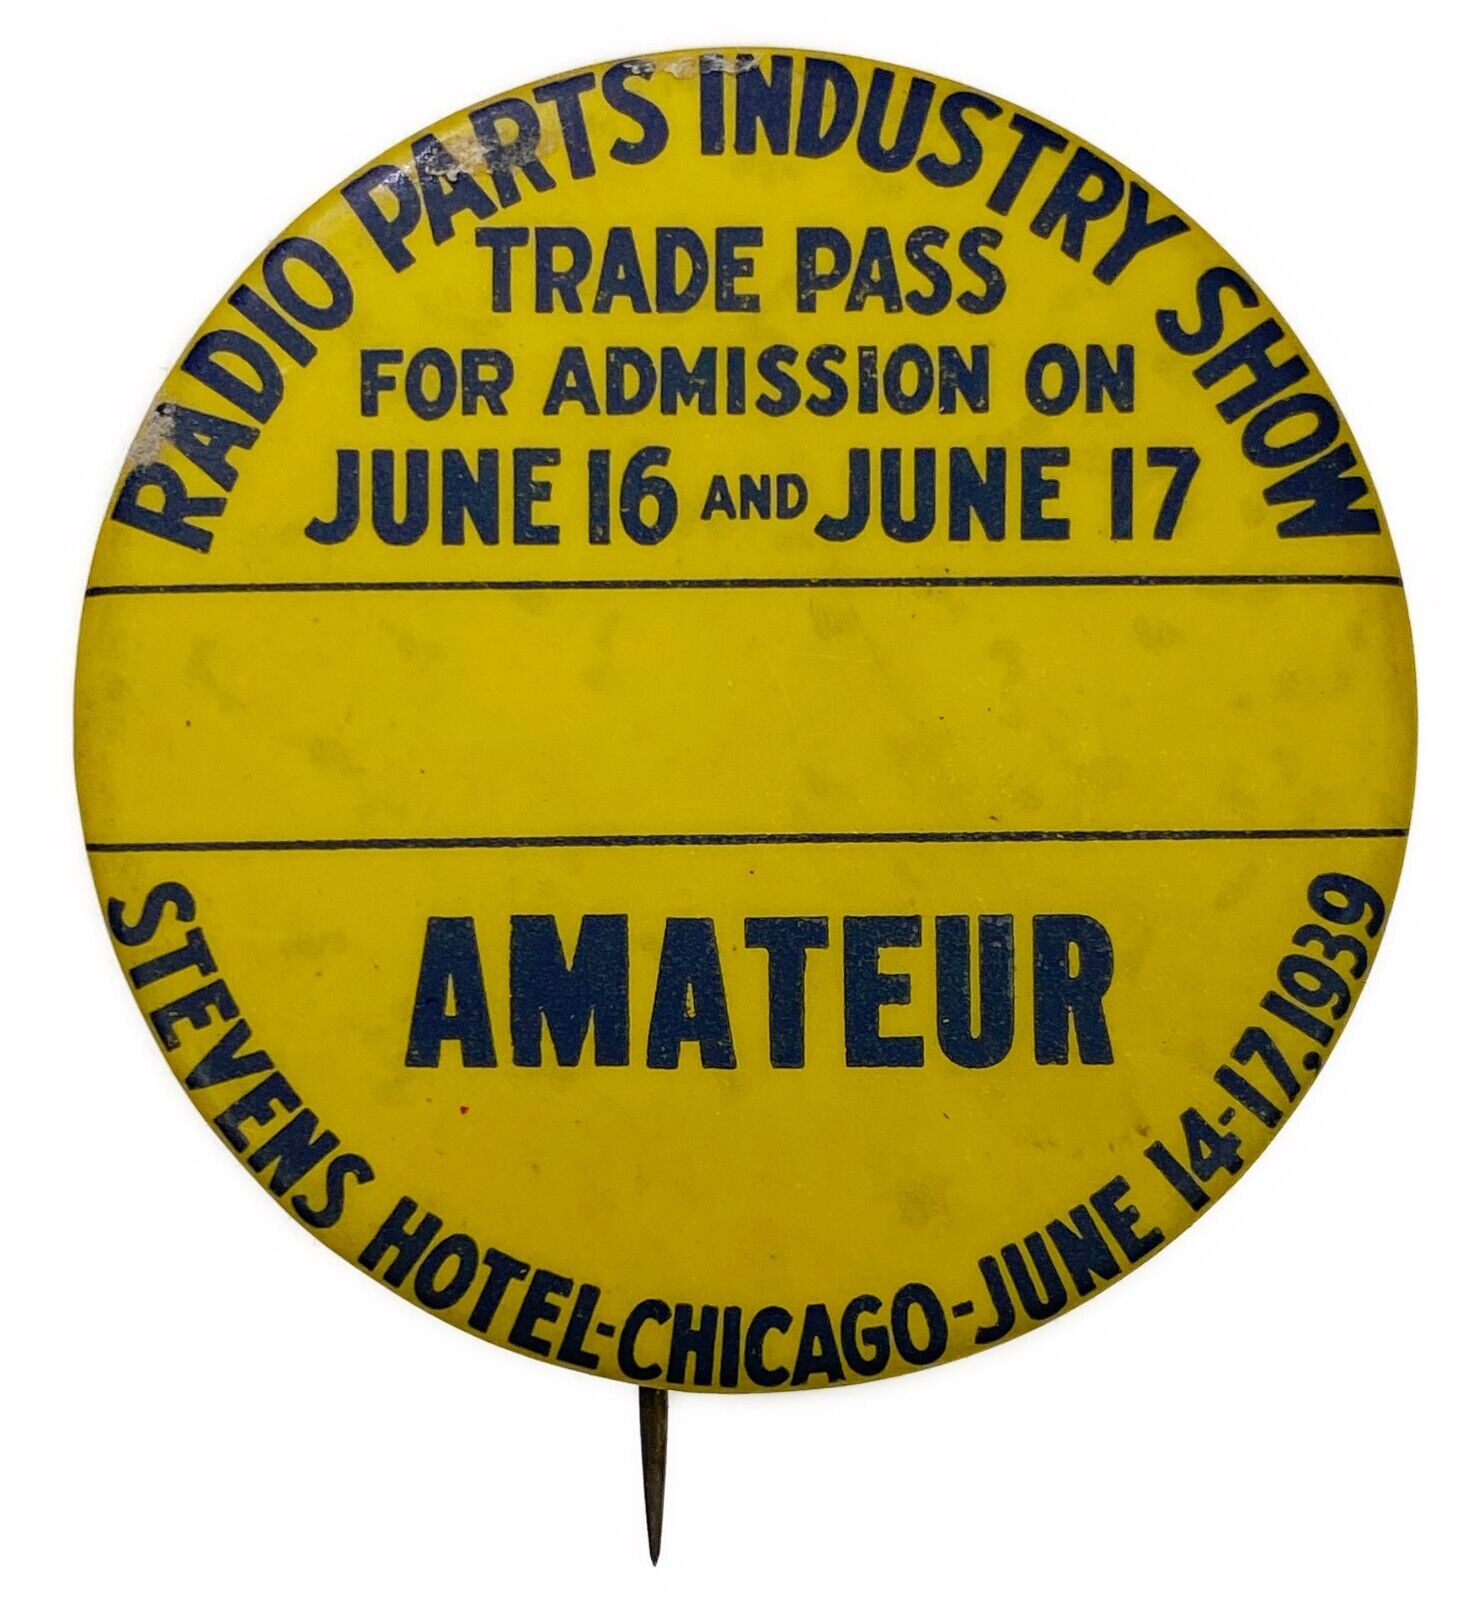 Radio Parts Industry Show Trade Pass 1939  PinBack Button Acorn Badge Co Chicago